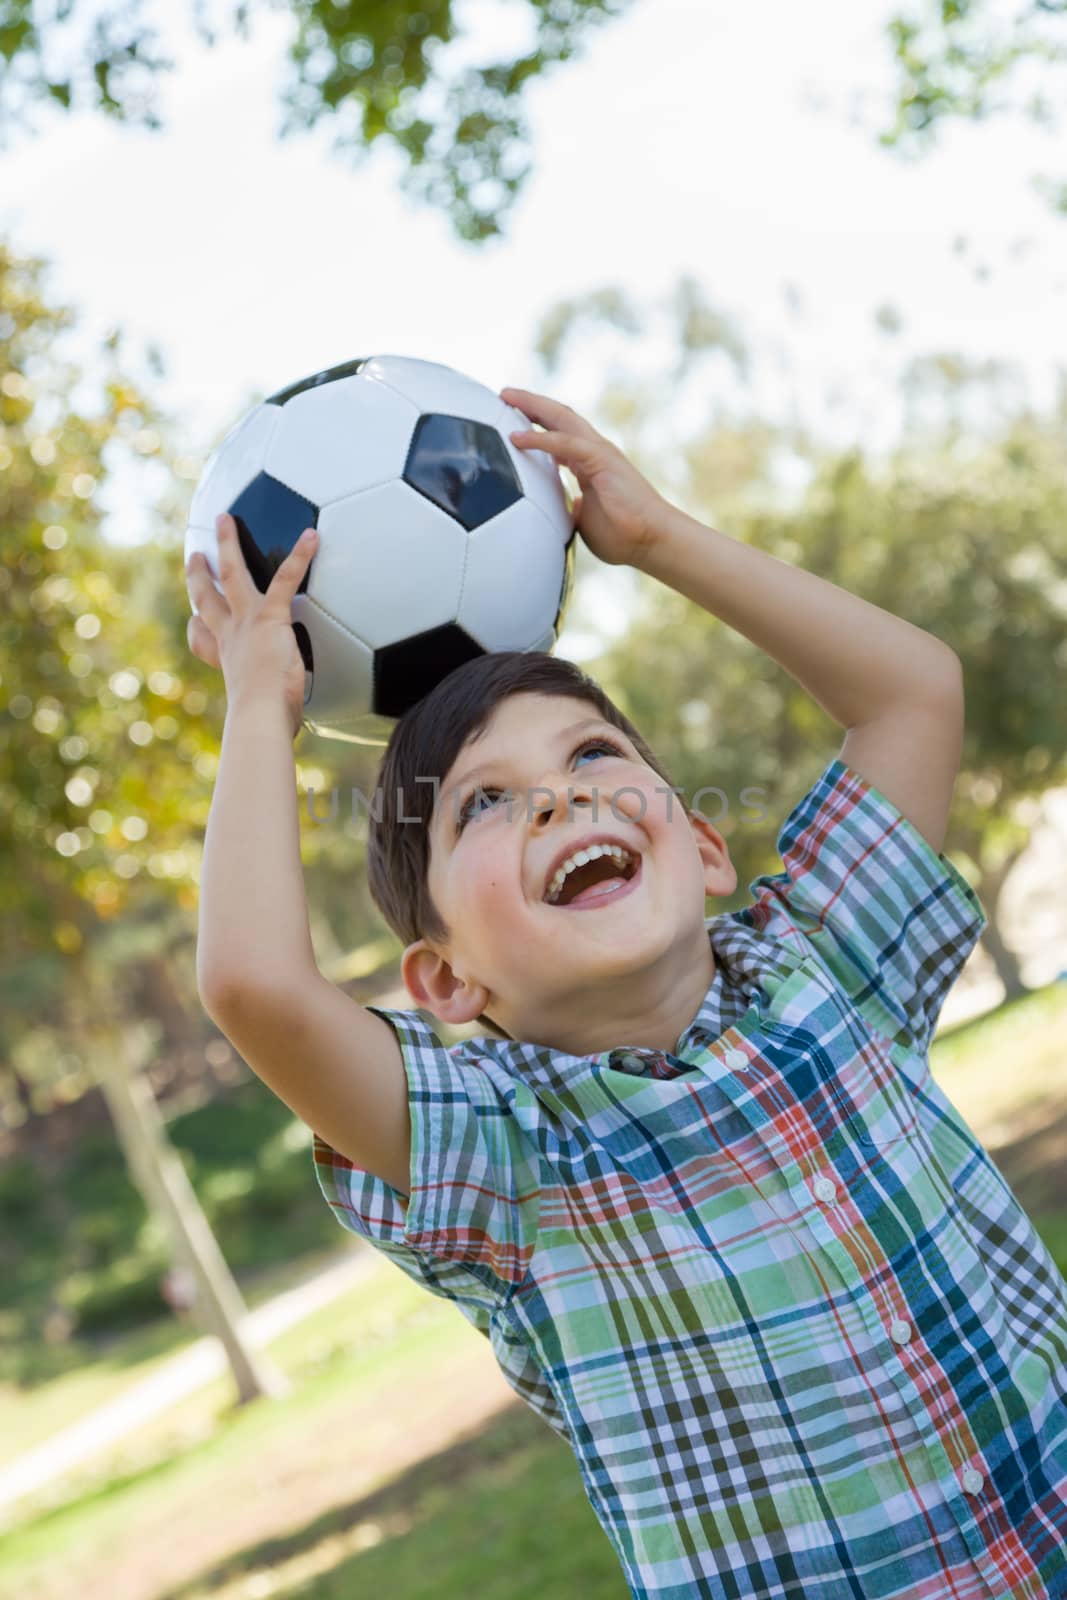 Cute Young Boy Playing with Soccer Ball Outdoors in the Park. by Feverpitched